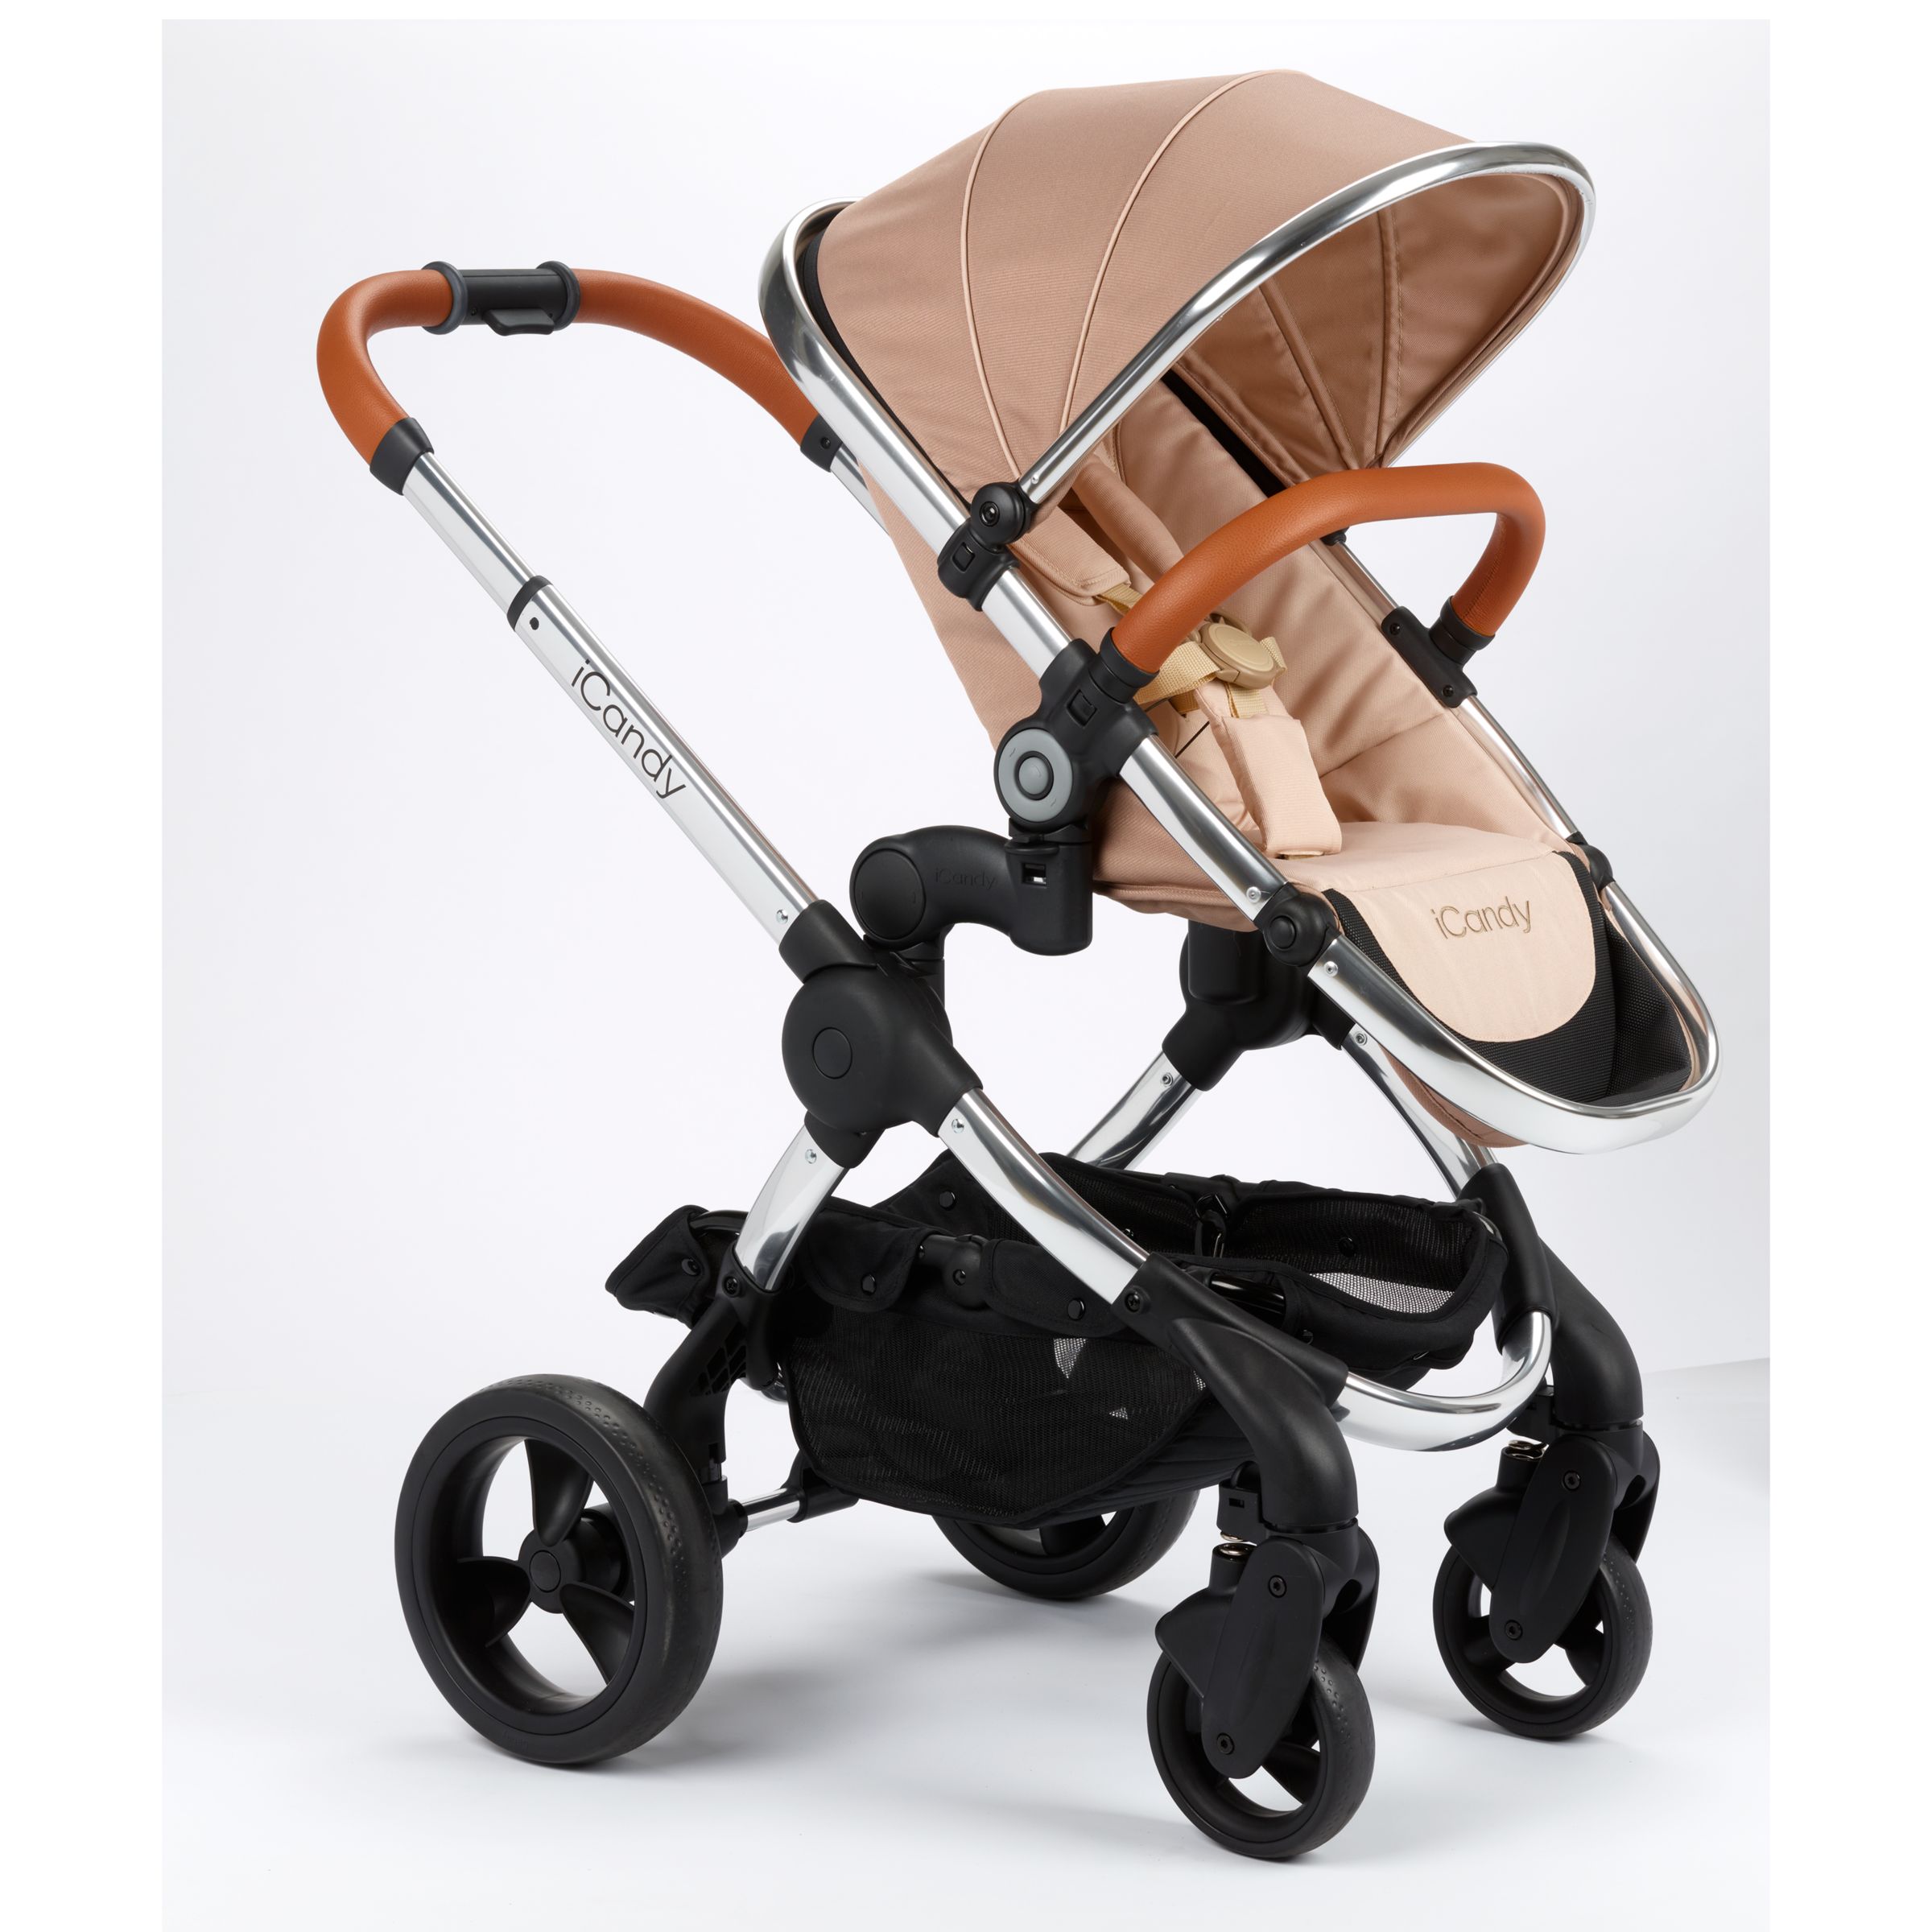 double stroller folds down small